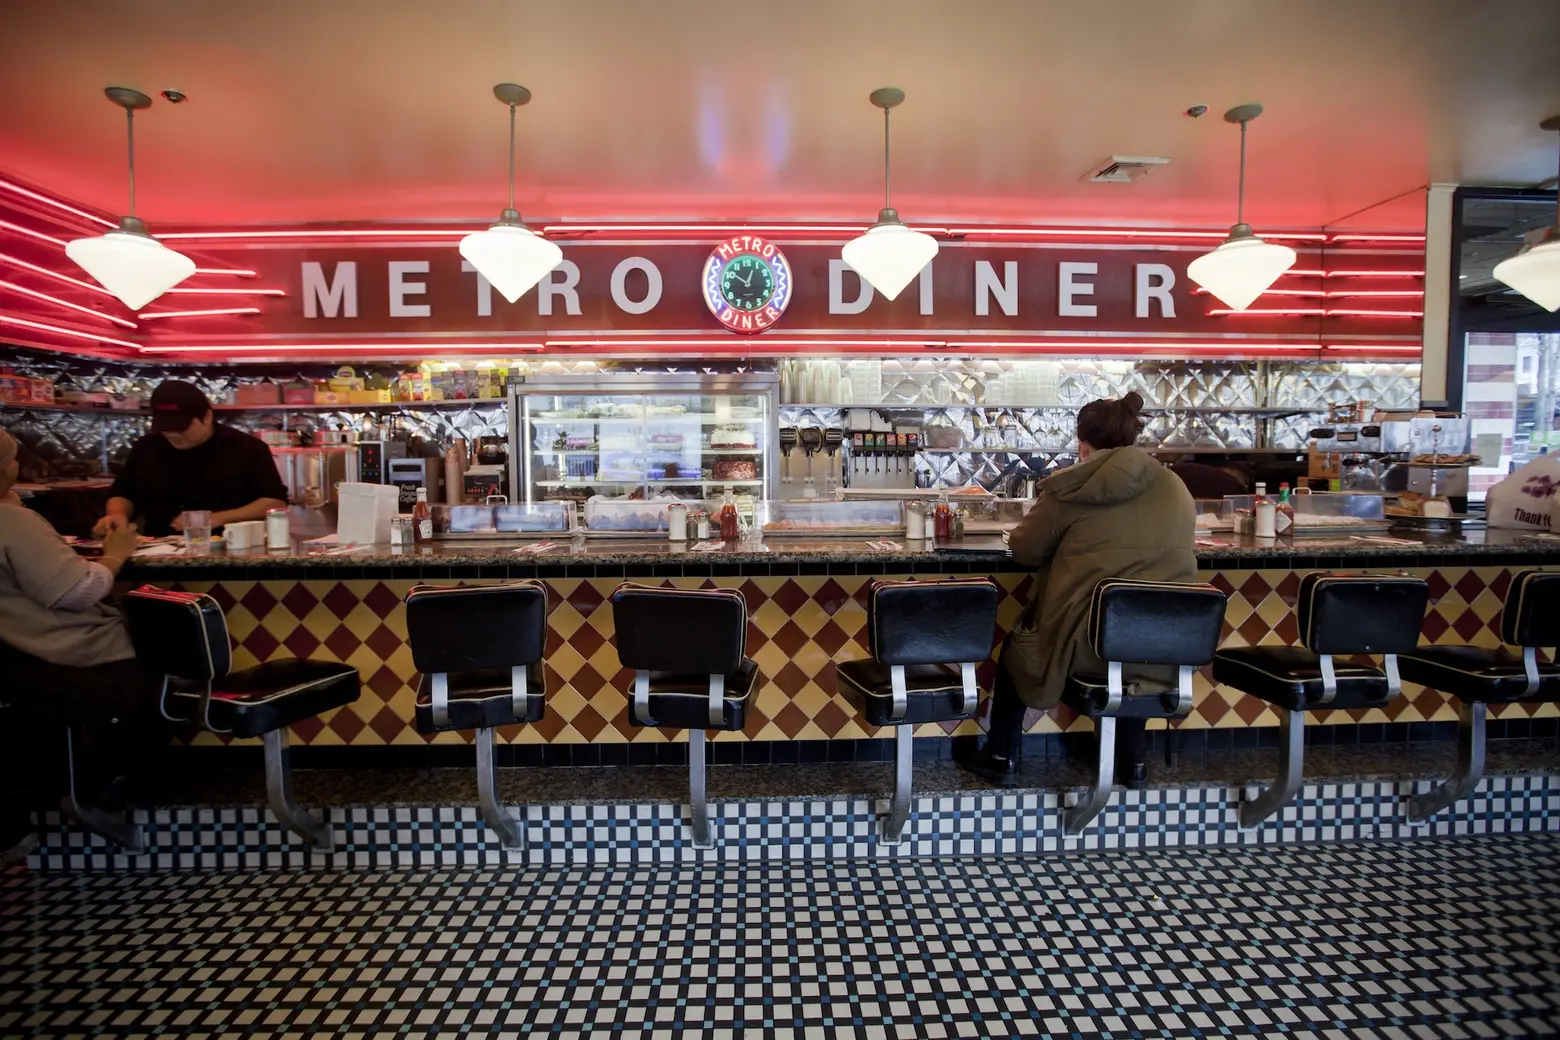 The Urban Lens: The quest to document every diner in NYC